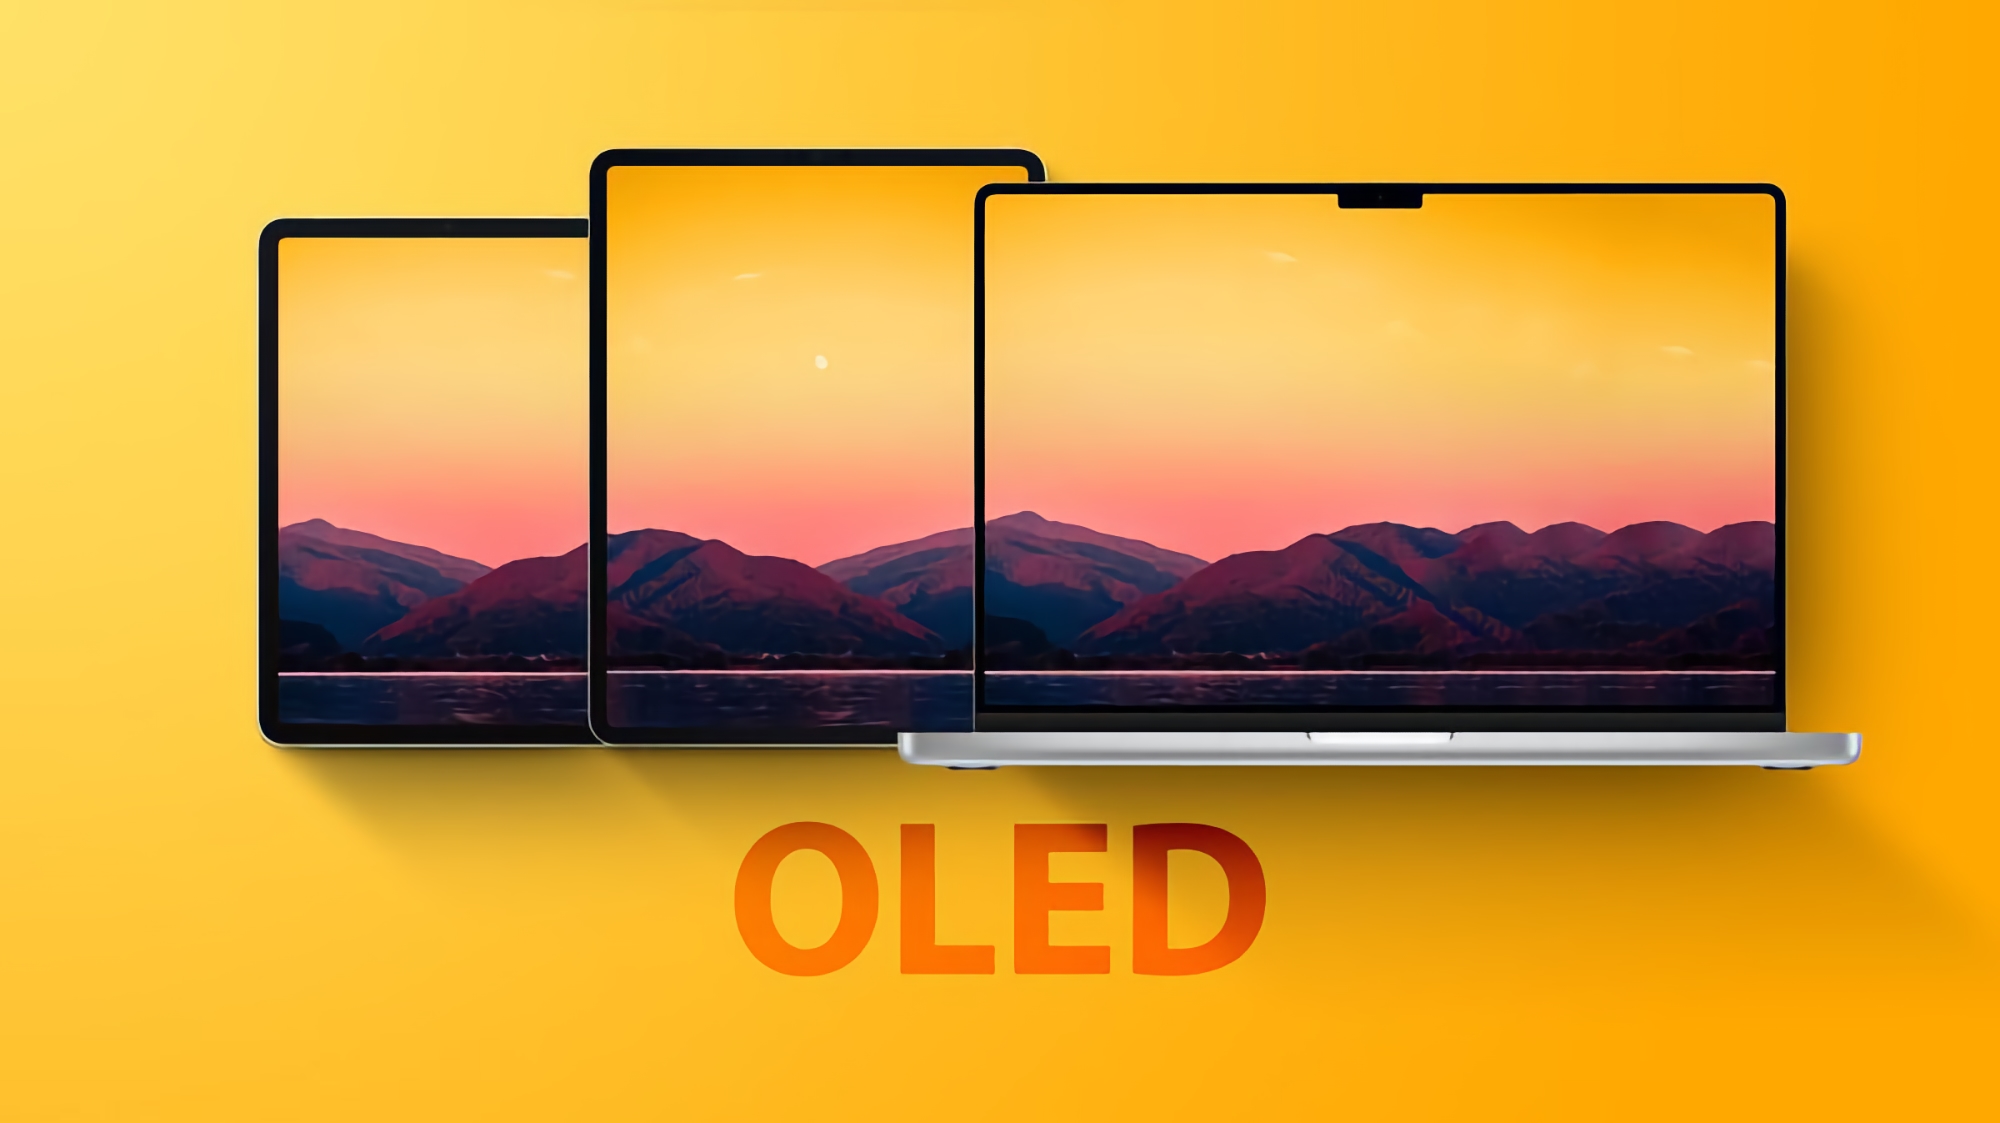 Source: Apple will install ultra-bright OLED displays in its next generation iPad Pro and MacBook Pro